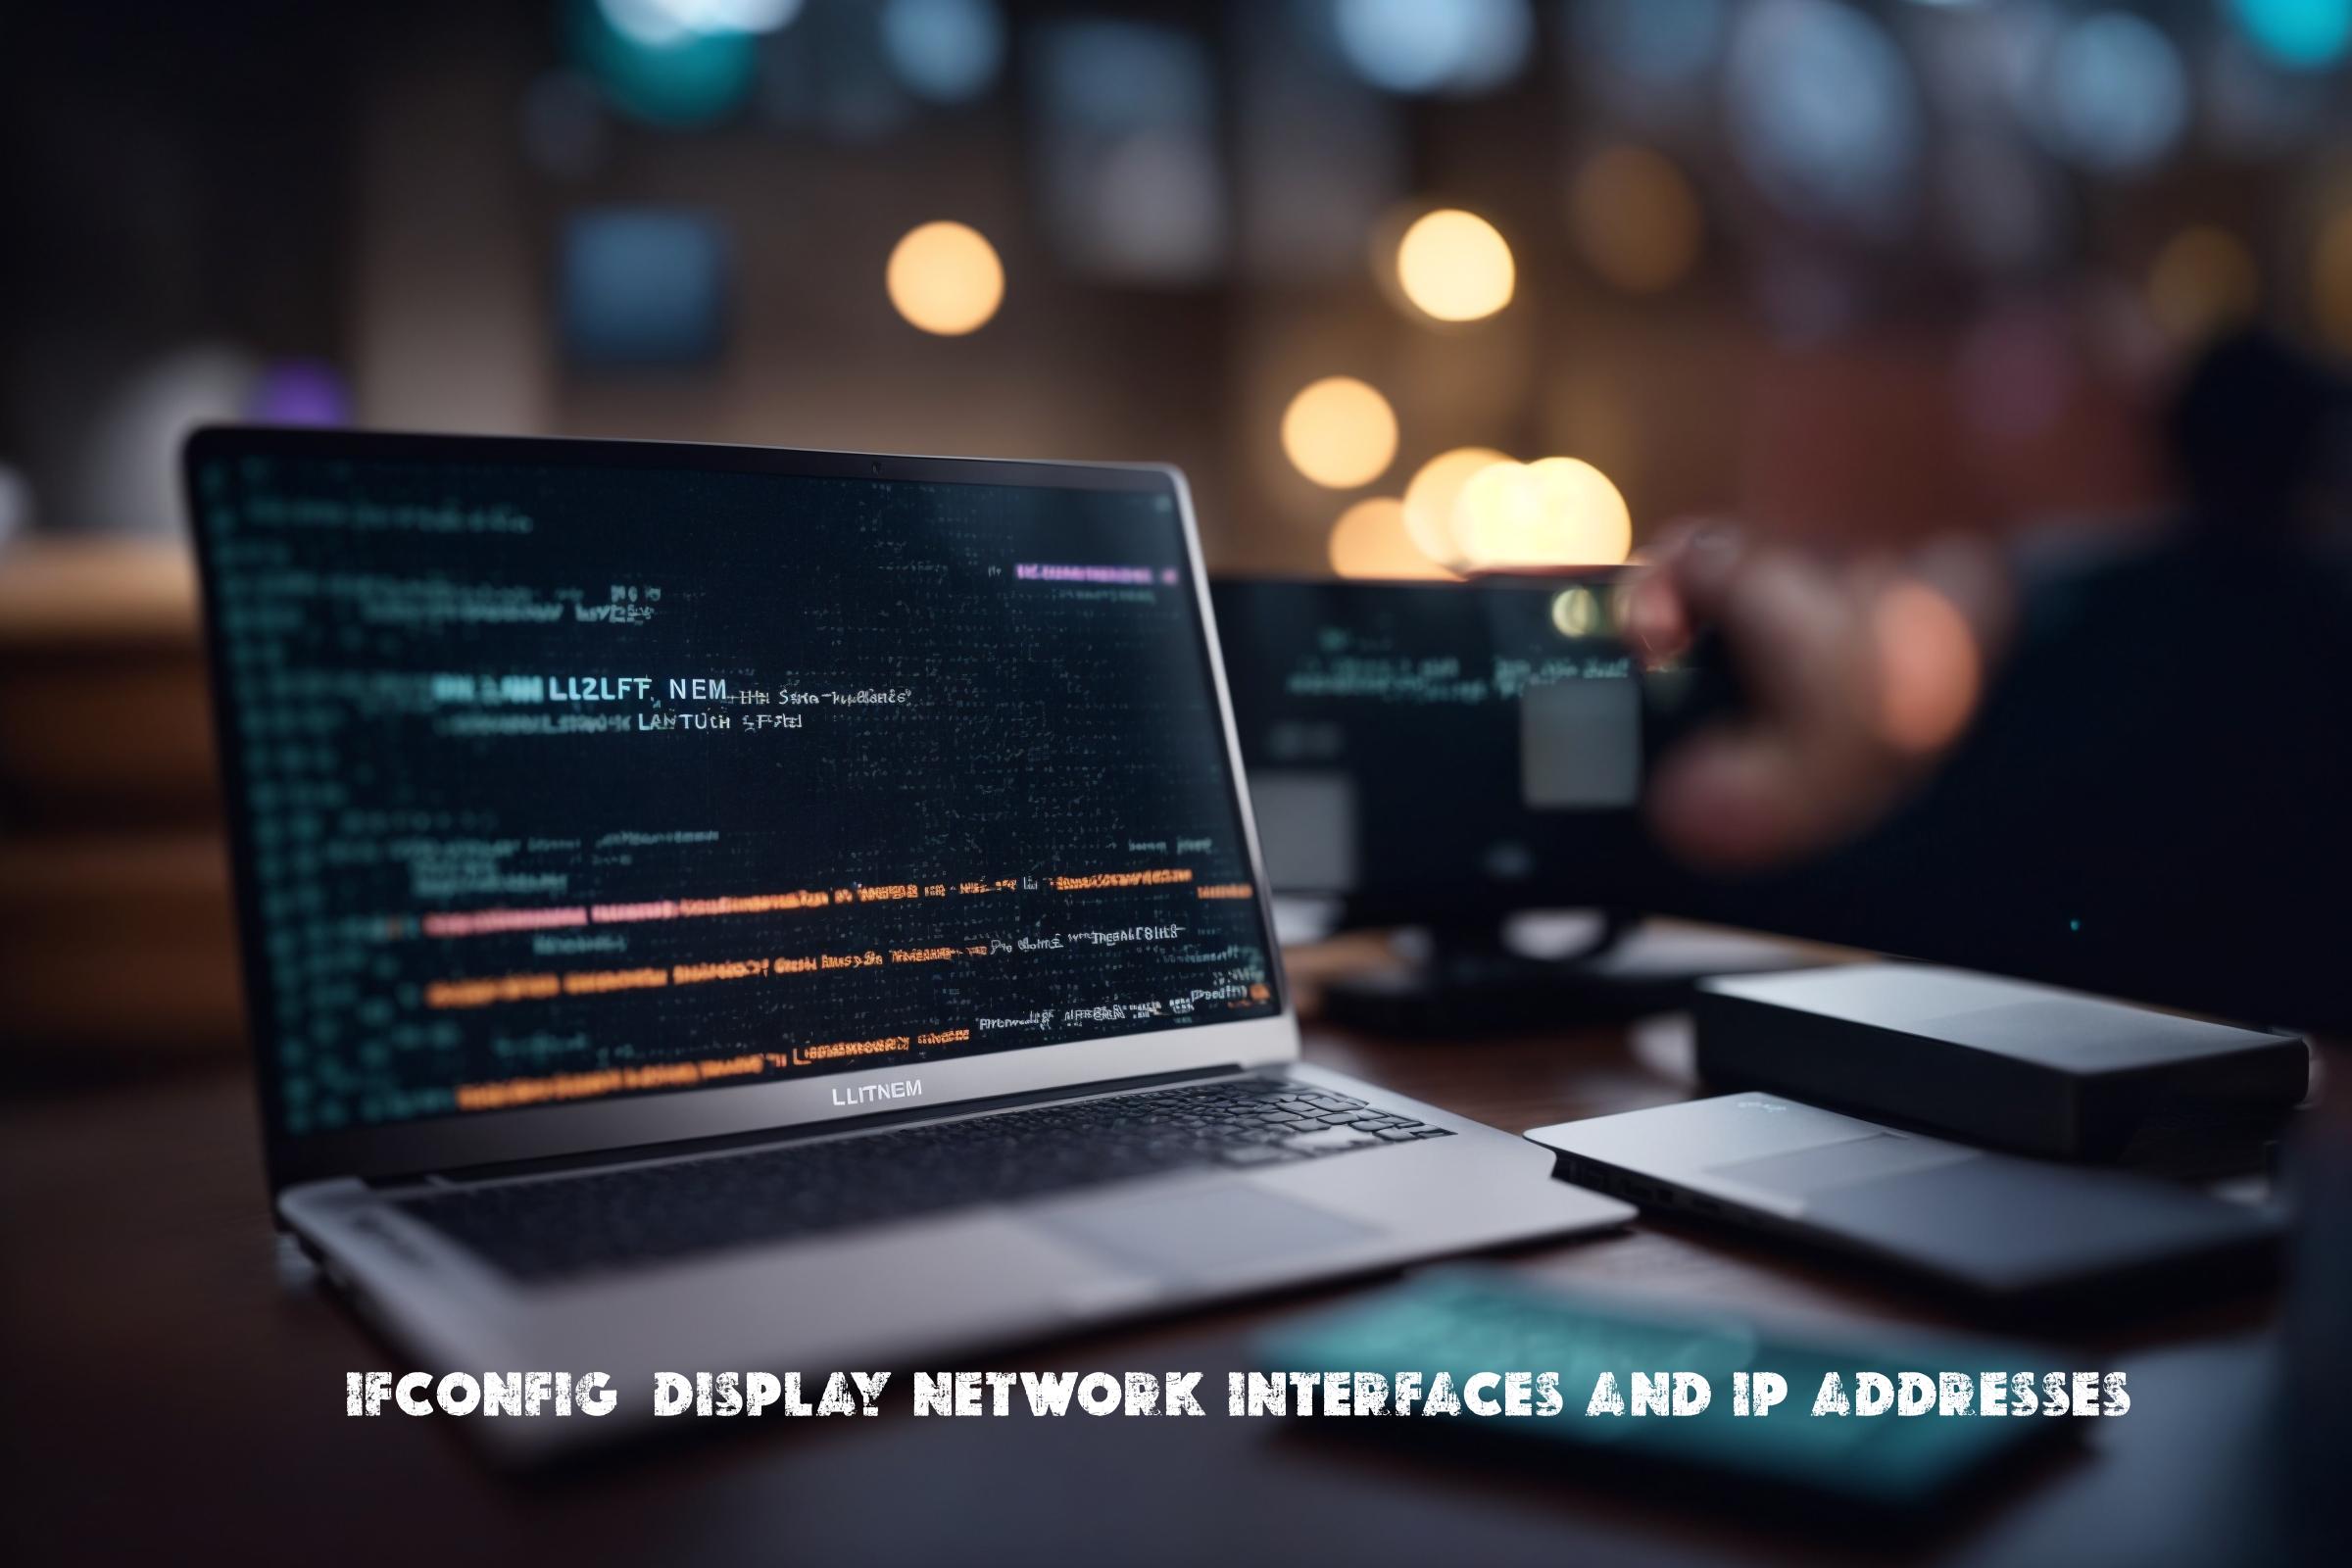 ifconfig – Display network interfaces and IP addresses